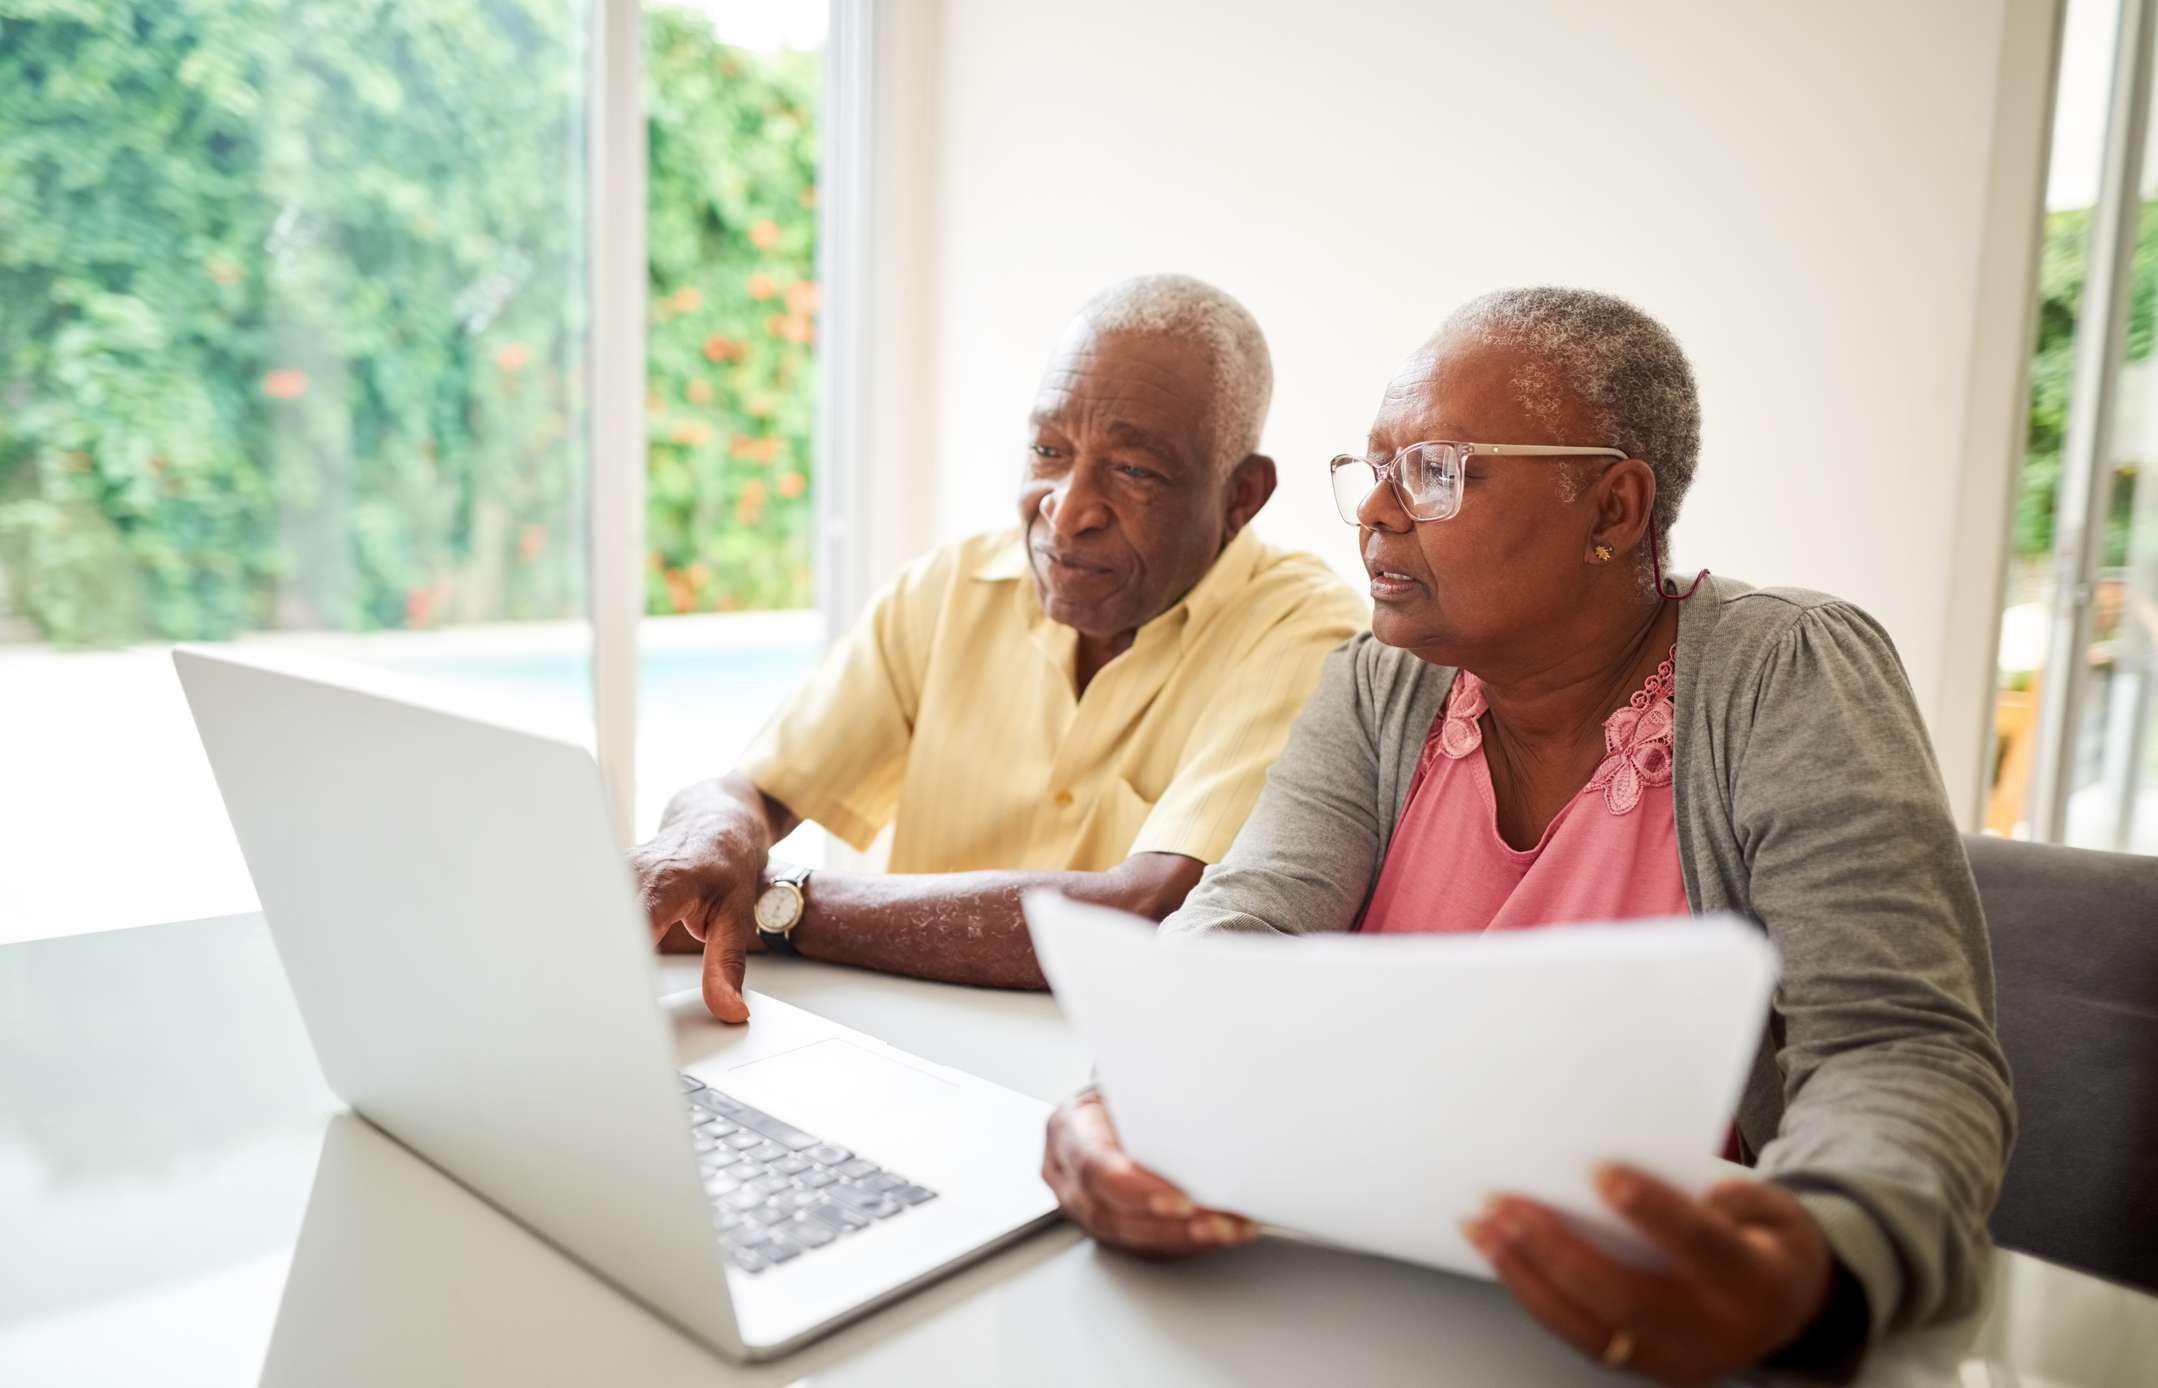 Older couple working together on laptop at home